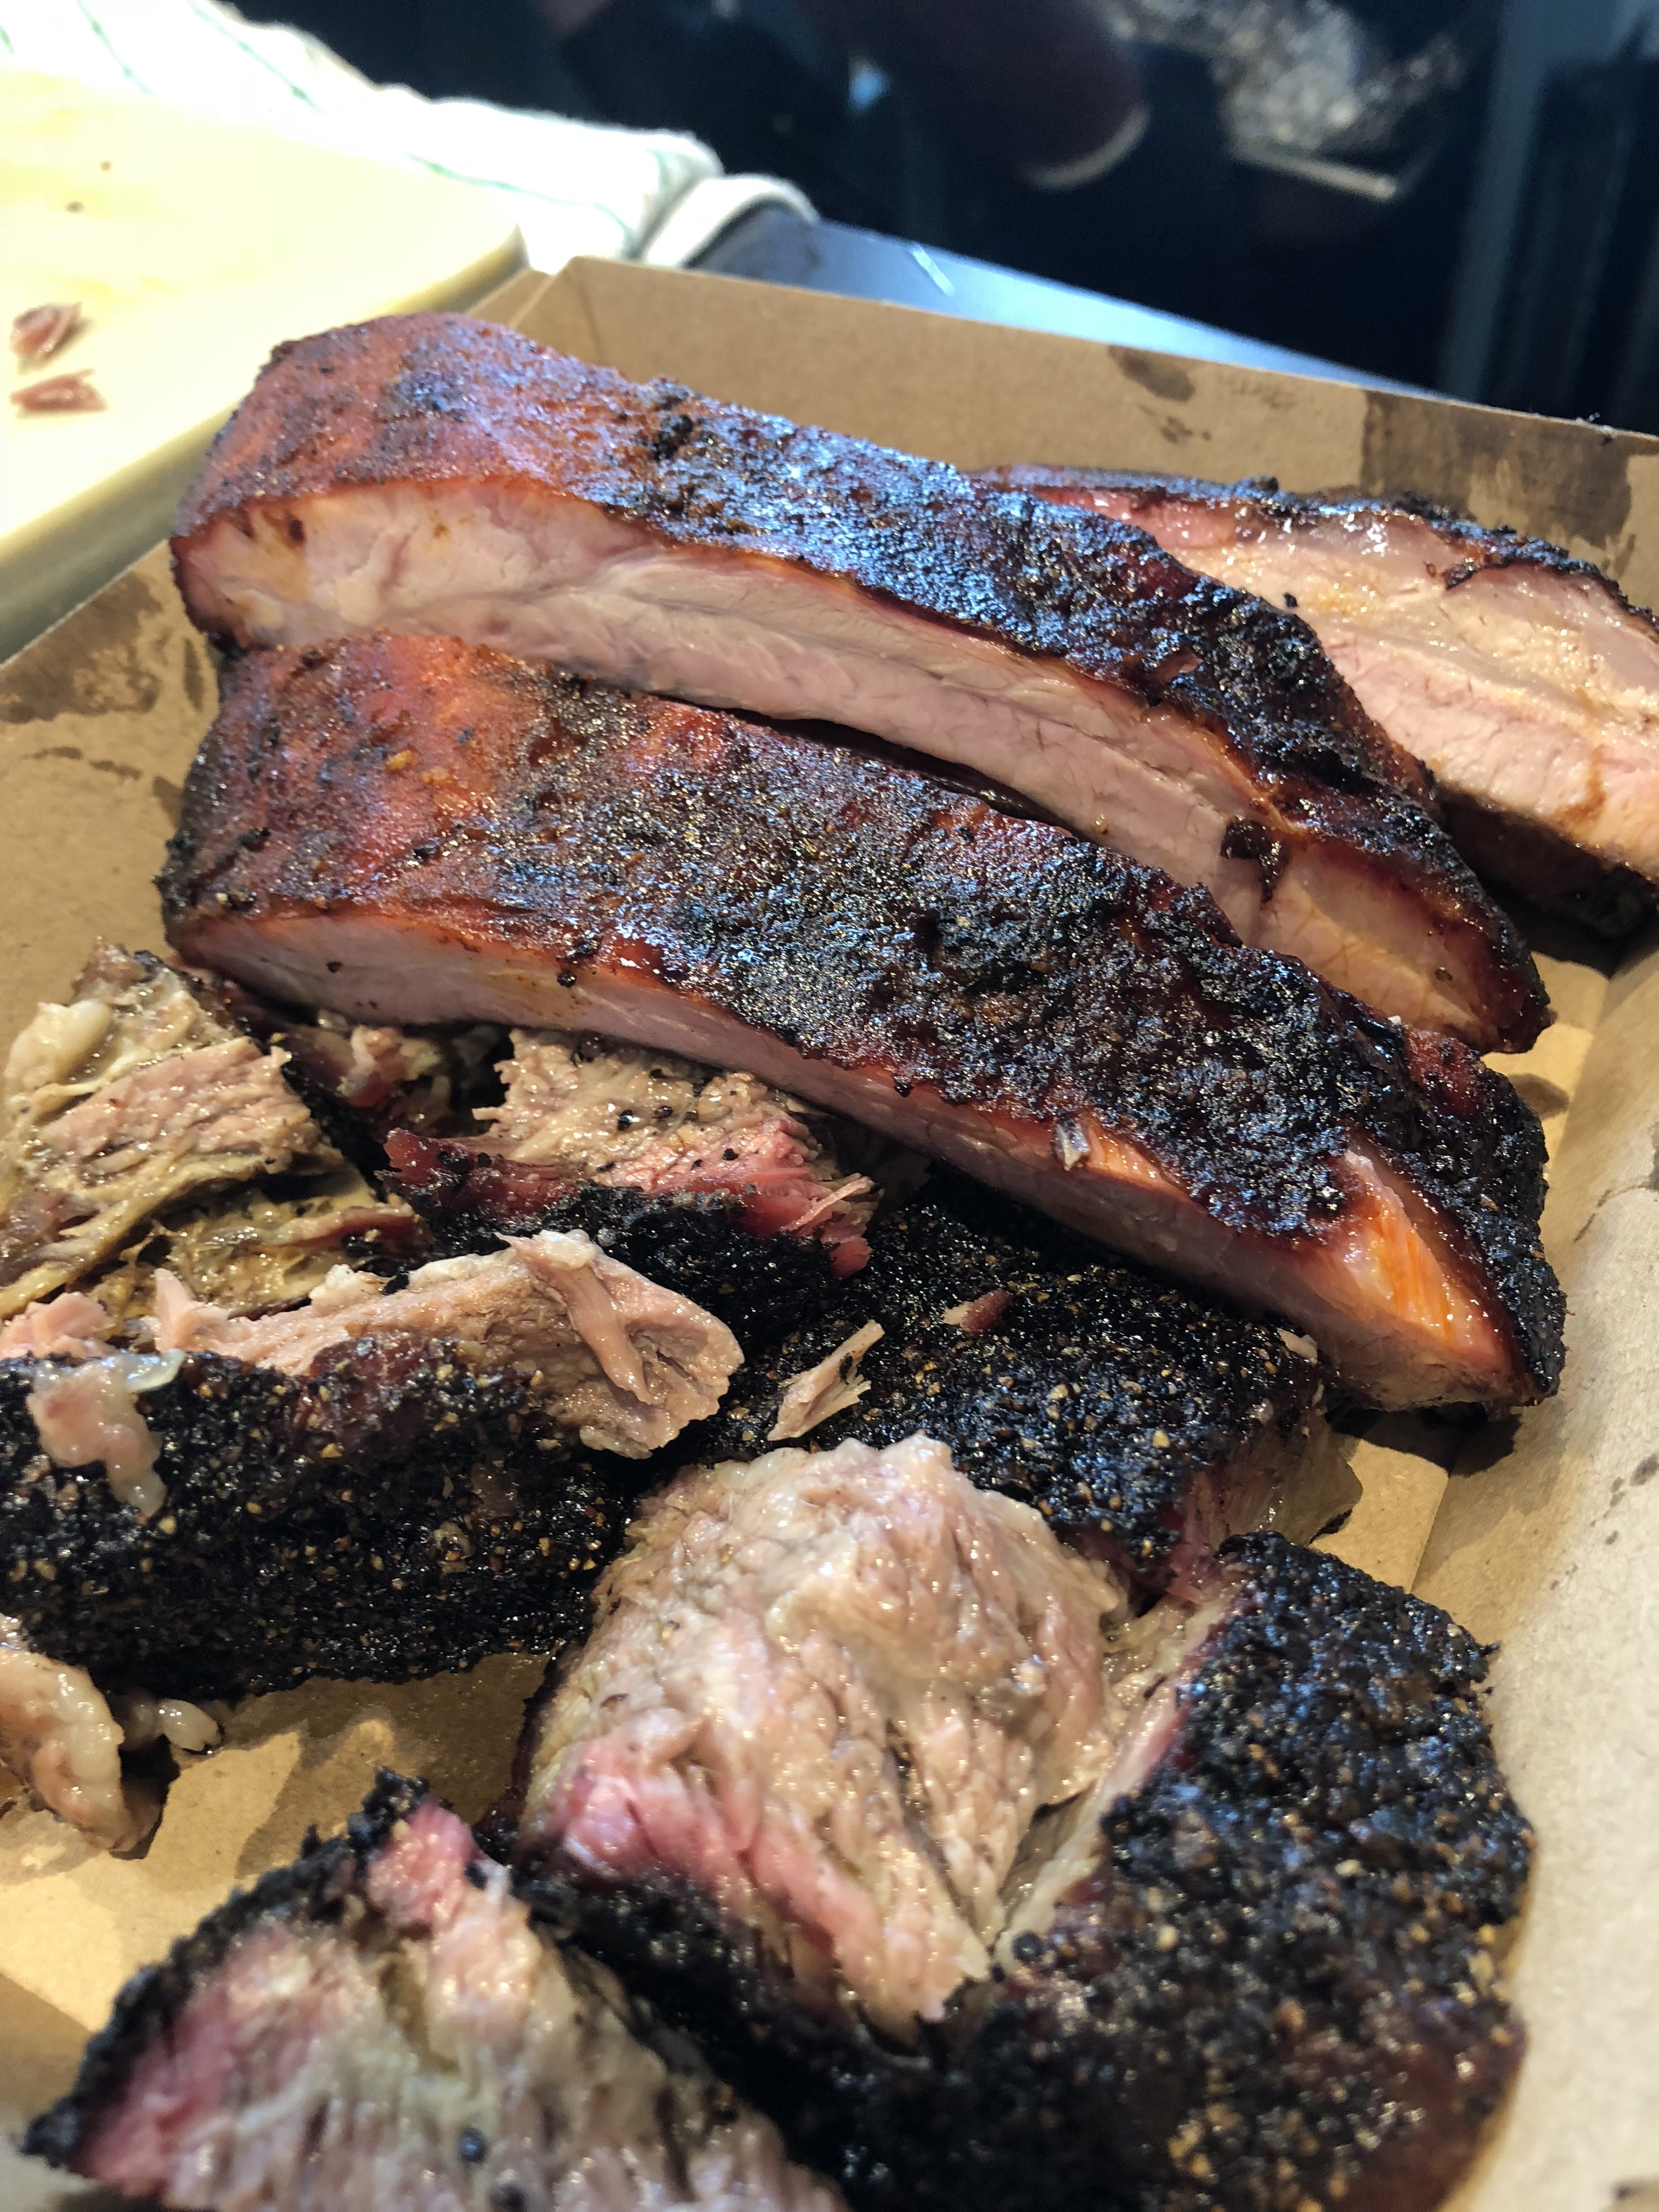 BlackBear BBQ takes over the Food and Wine show!